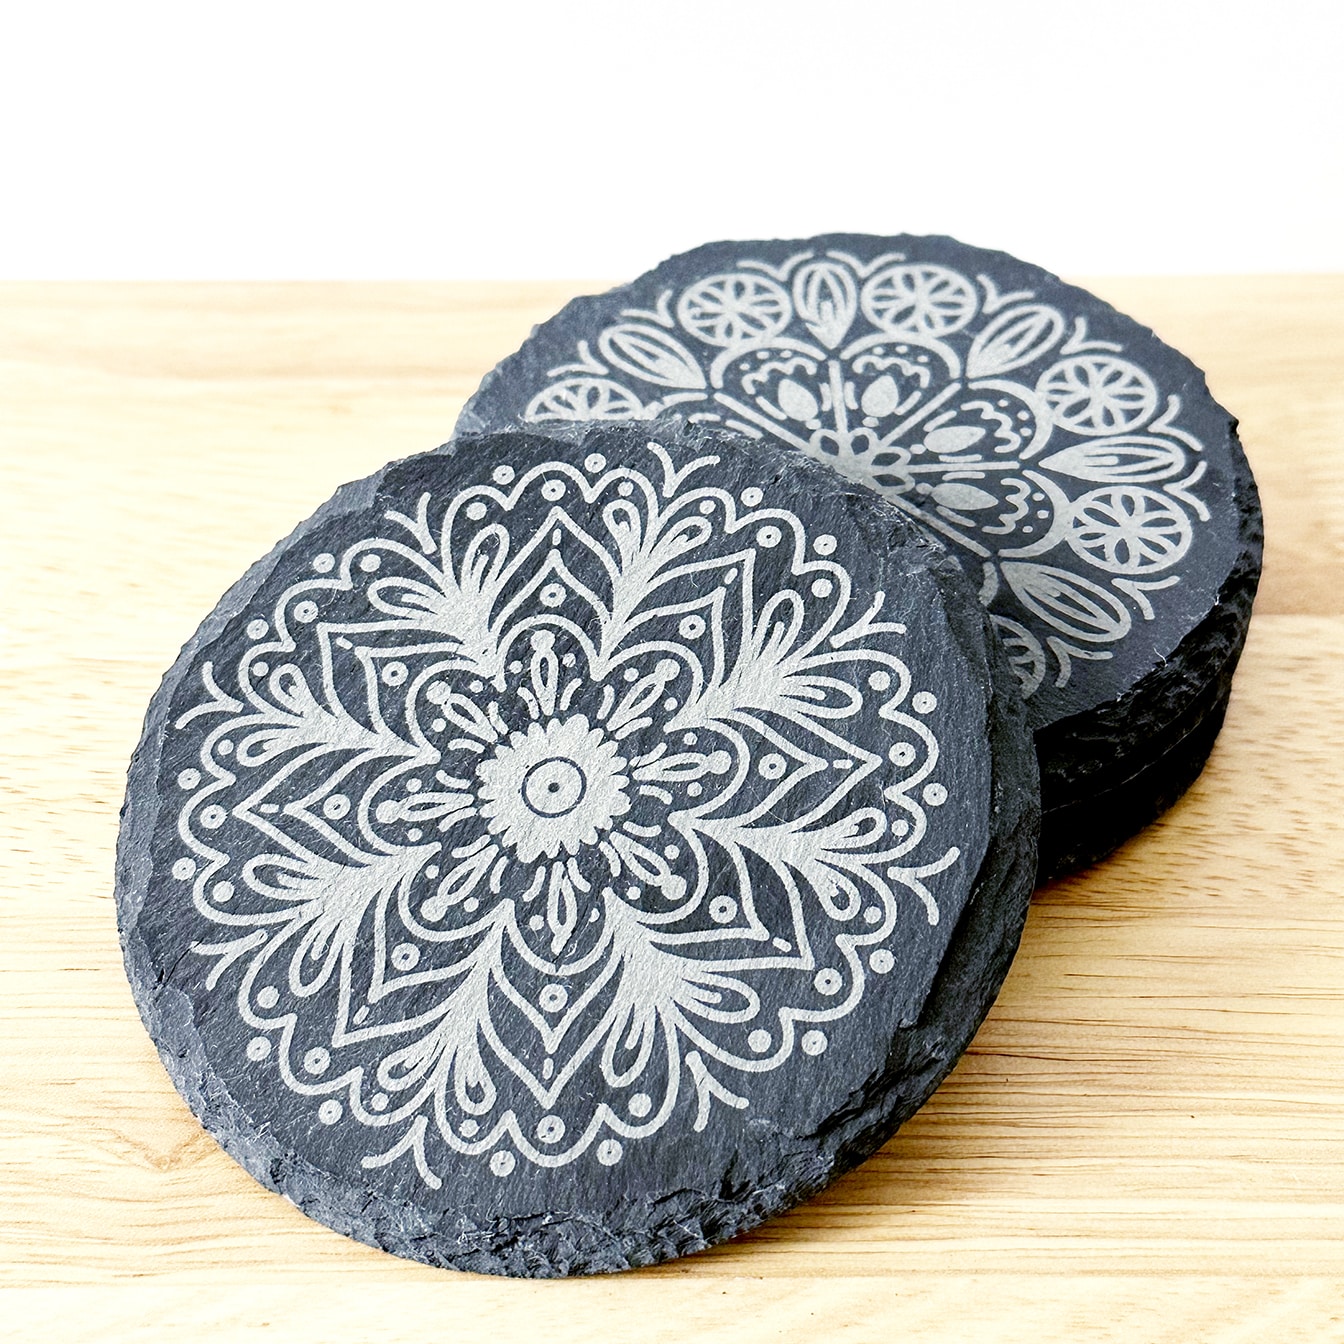 How to Engrave Slate Coasters with a Laser Machine